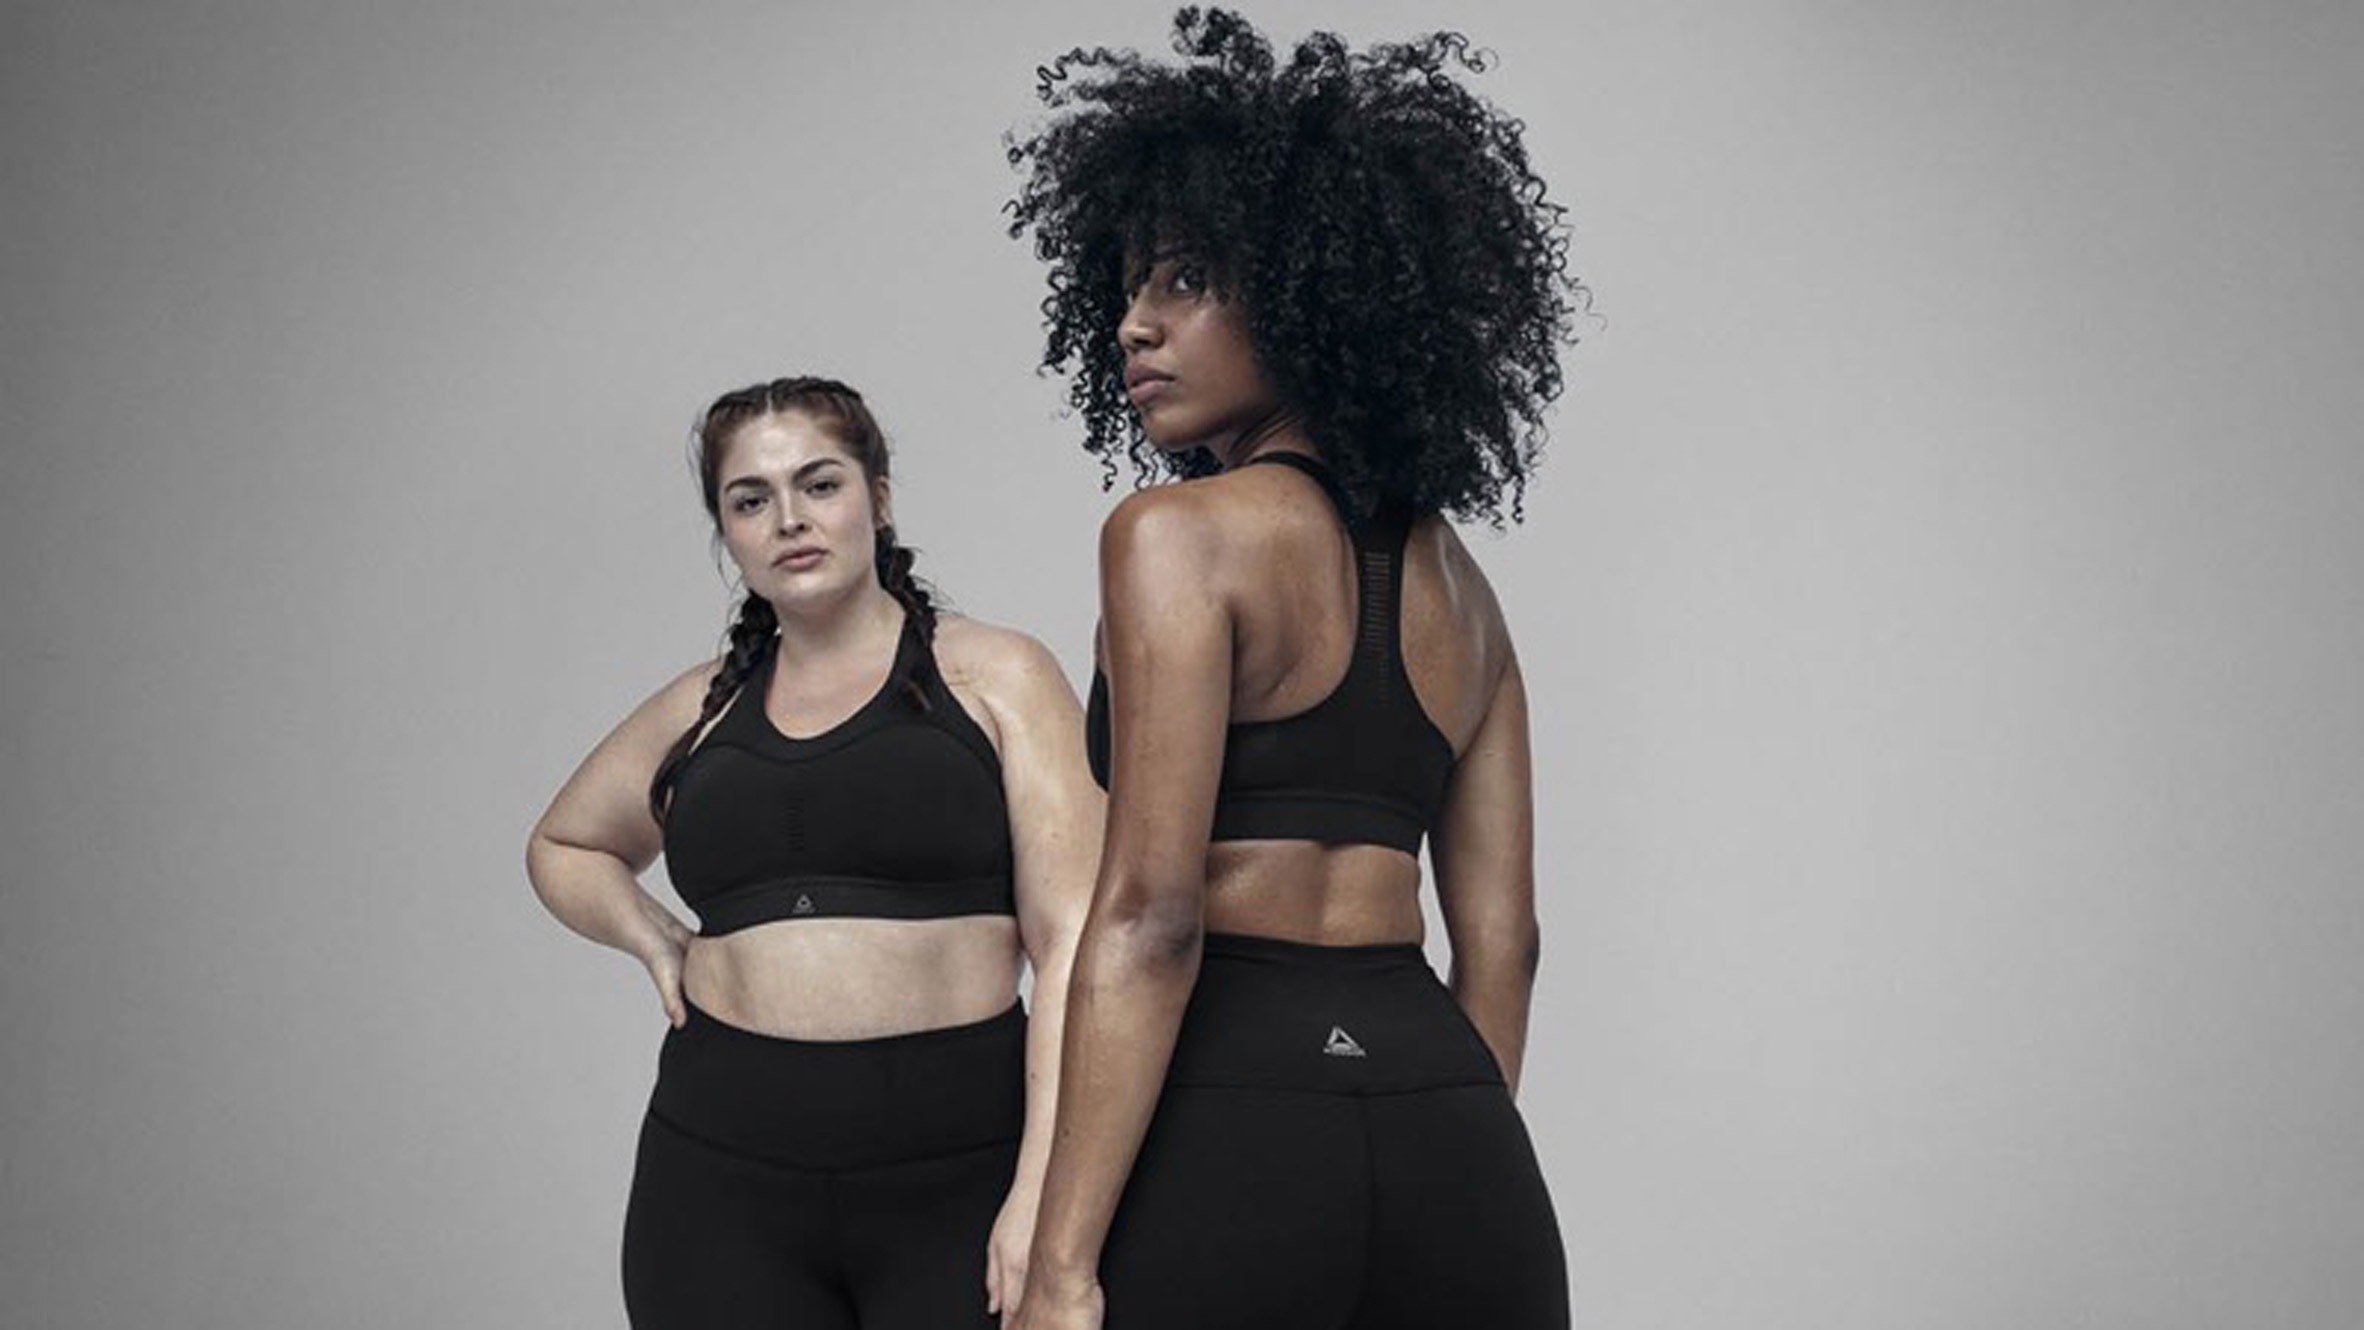 Reebok's PureMove sports bra firms up during movement